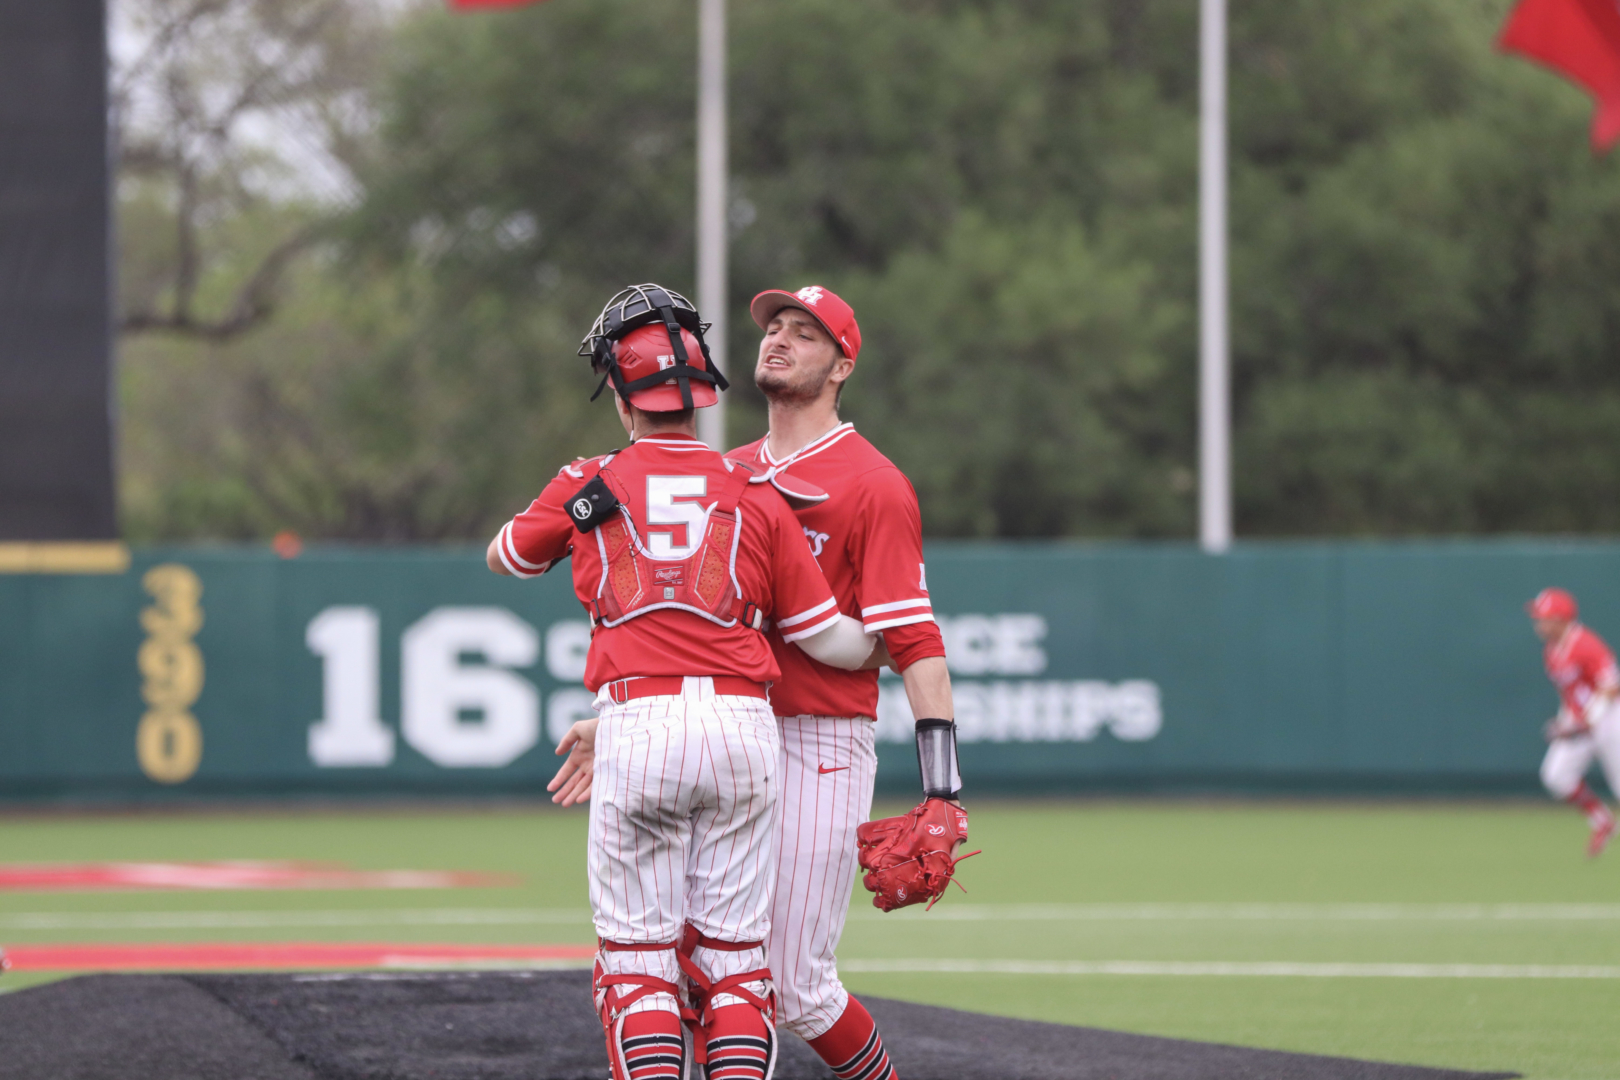 Ben Sears gives UH baseball catcher Anthony Tulimero a chest bump after securing the series victory over Tulane, the AAC's first place team. | James Mueller/The Cougar